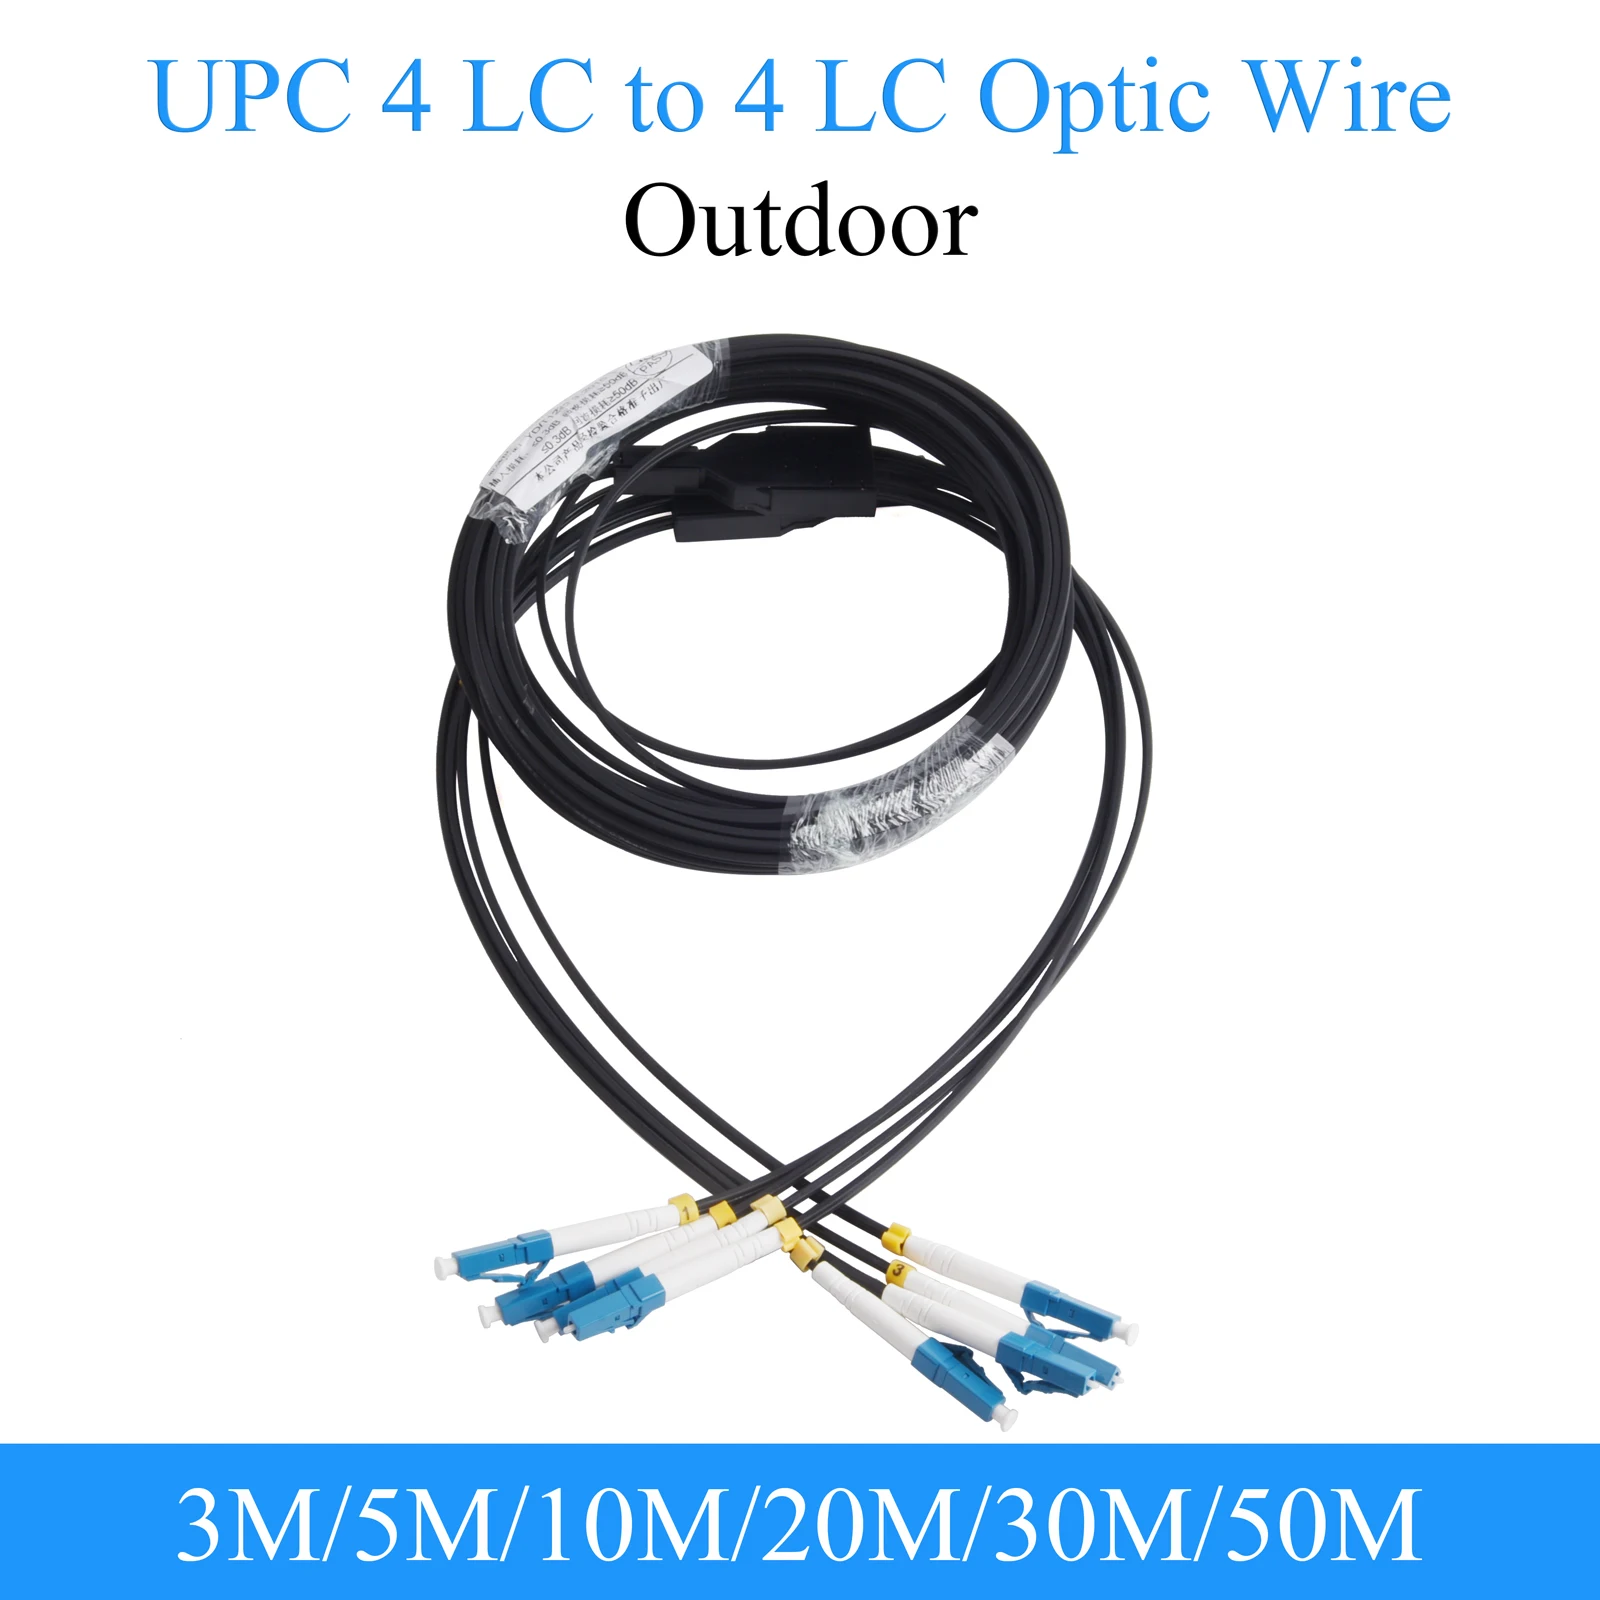 

Fiber Optic Wire UPC 4 LC to 4 LC Optical Convert Single-mode 4-core Outdoor Extension Cable Patch Cord 3M/5M/10M/20M/30M/50M